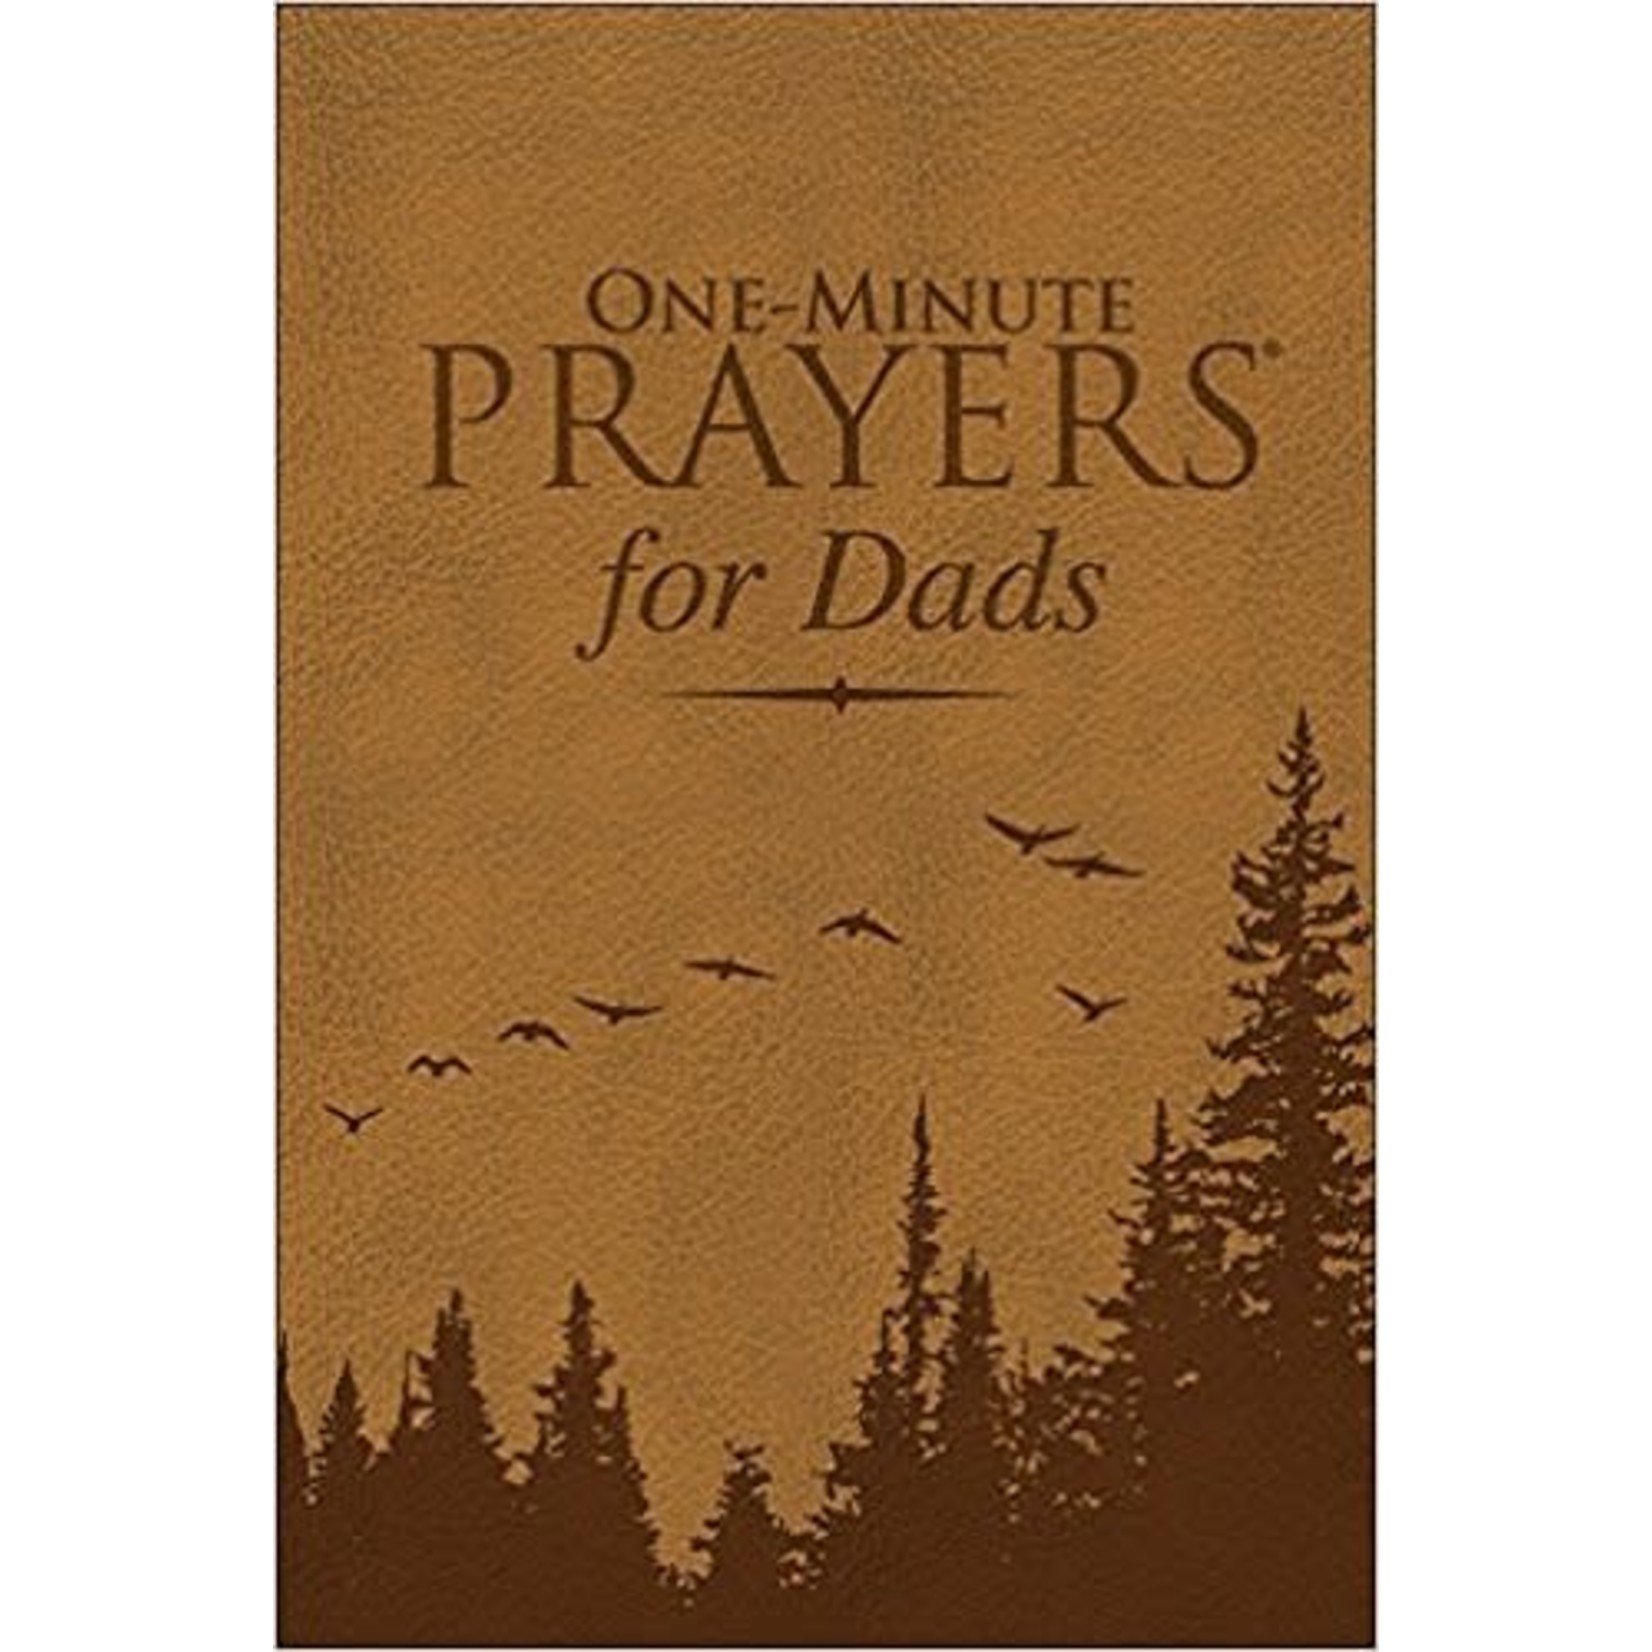 Harvest House Publishing One-Minute Prayers For Dad